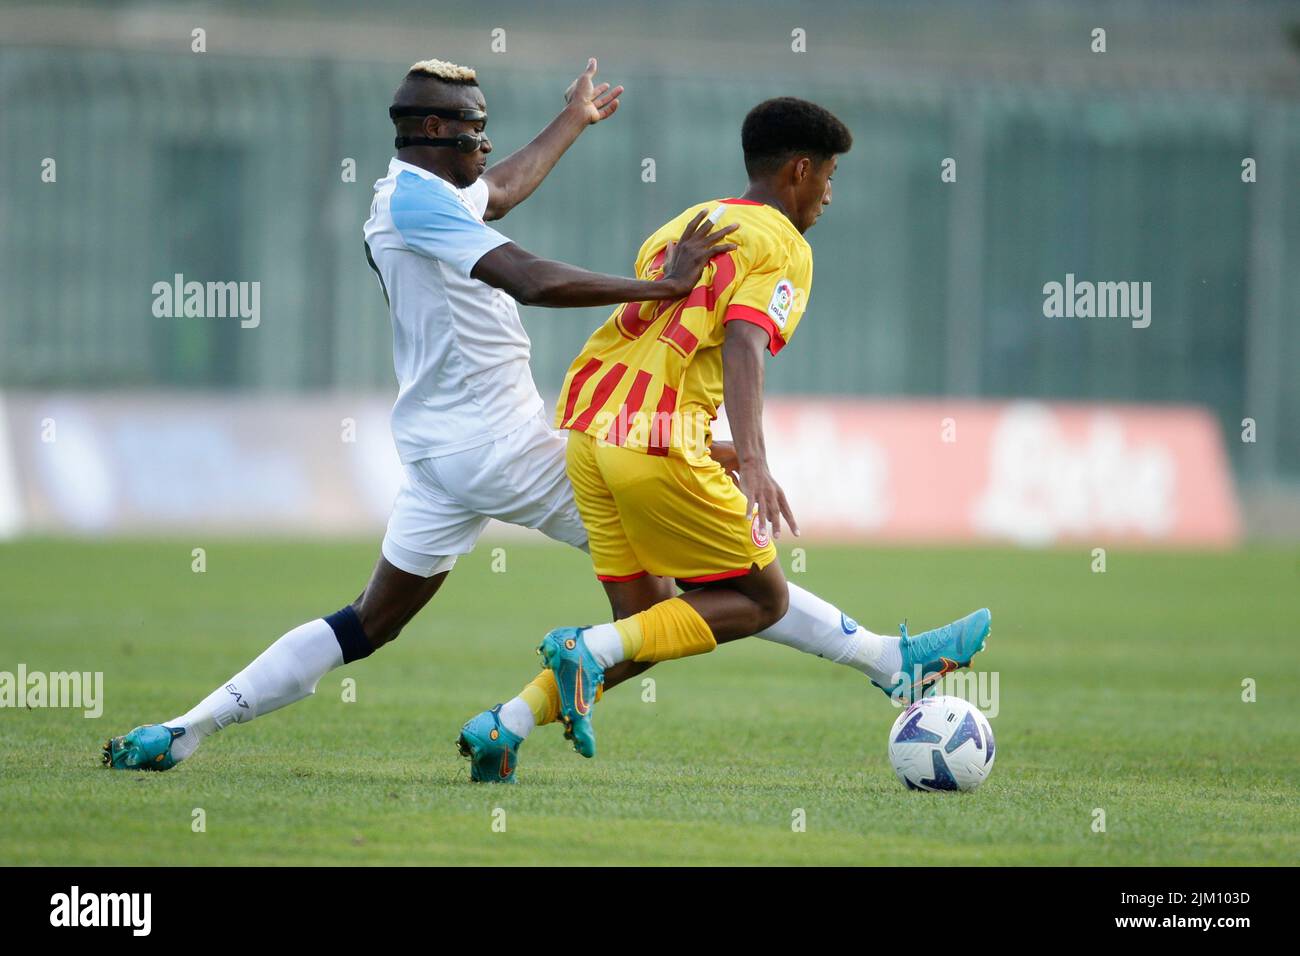 SSC Napoli's Nigerian striker Victor Osimhen challenges for the ball with Girona's forward Oscar Urena during friendly match SSC Napoli Girona at the SSC Napoli's 2022-23 pre-season training camp in Castel di Sangro Stock Photo